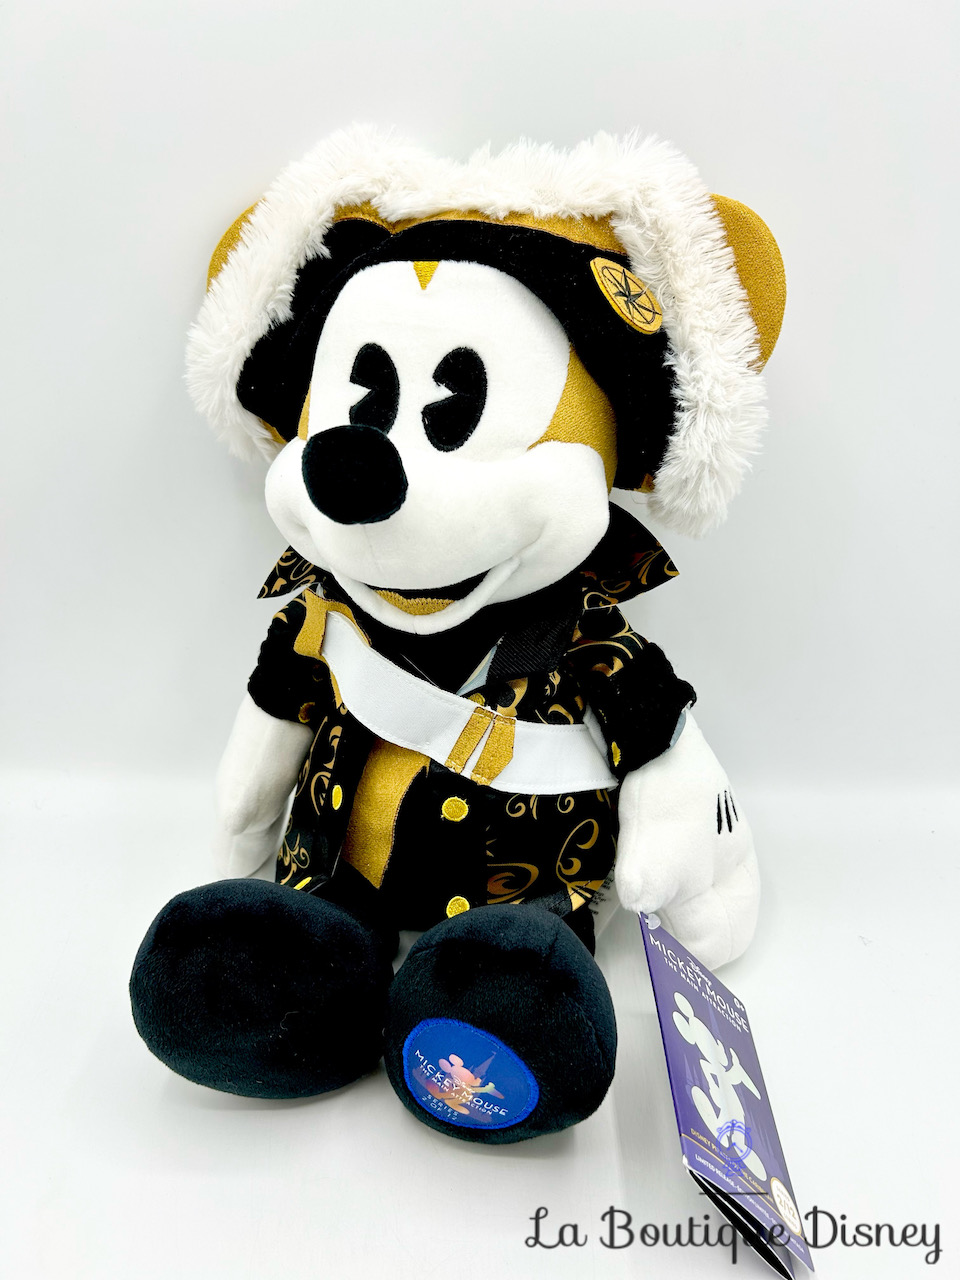 Peluche Mickey Mouse The Main Attraction 2 sur 12 Pirates of the Caribbean Disney Store 2022 Édition limitée 44 cm